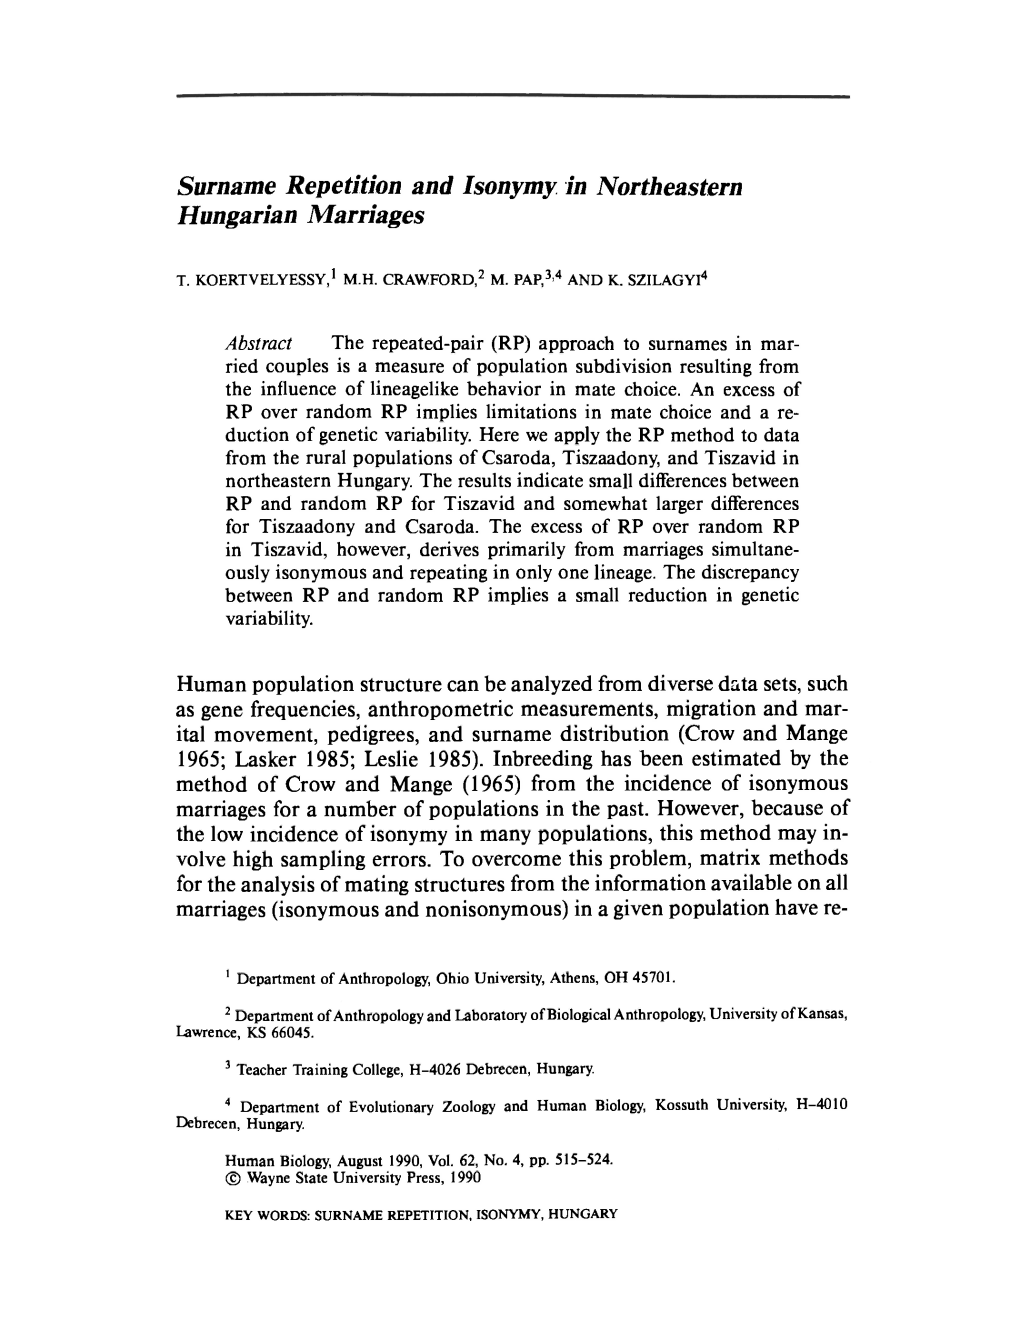 Surname Repetition and Isonymy in Northeastern Hungarian Marriages